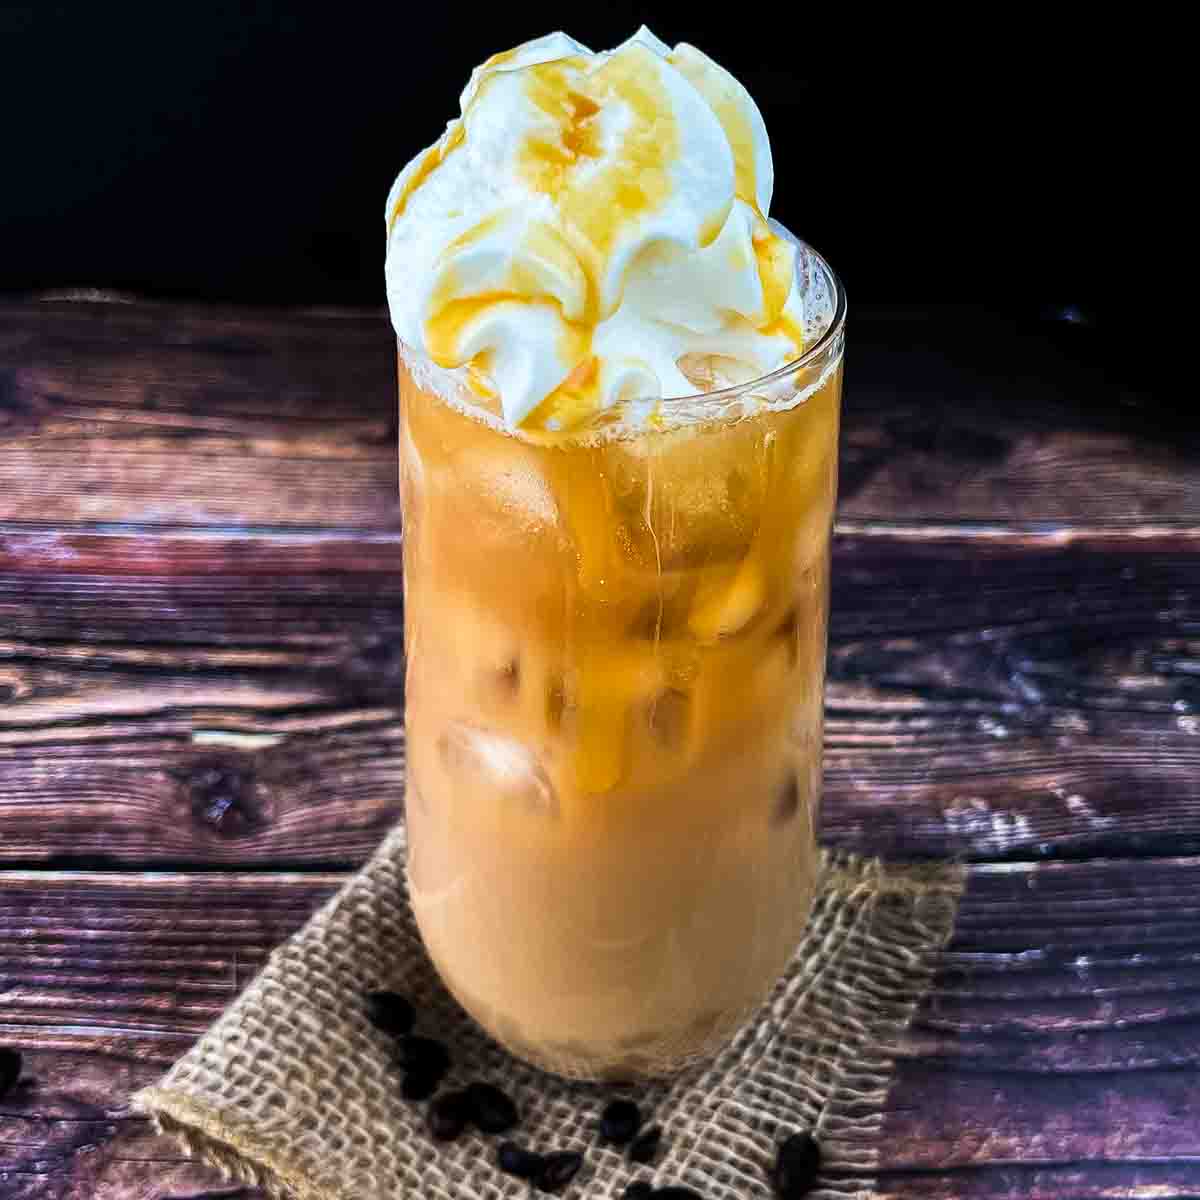 mcdonalds caramel iced coffee with whipcream on top drizzled with caramel sauce.